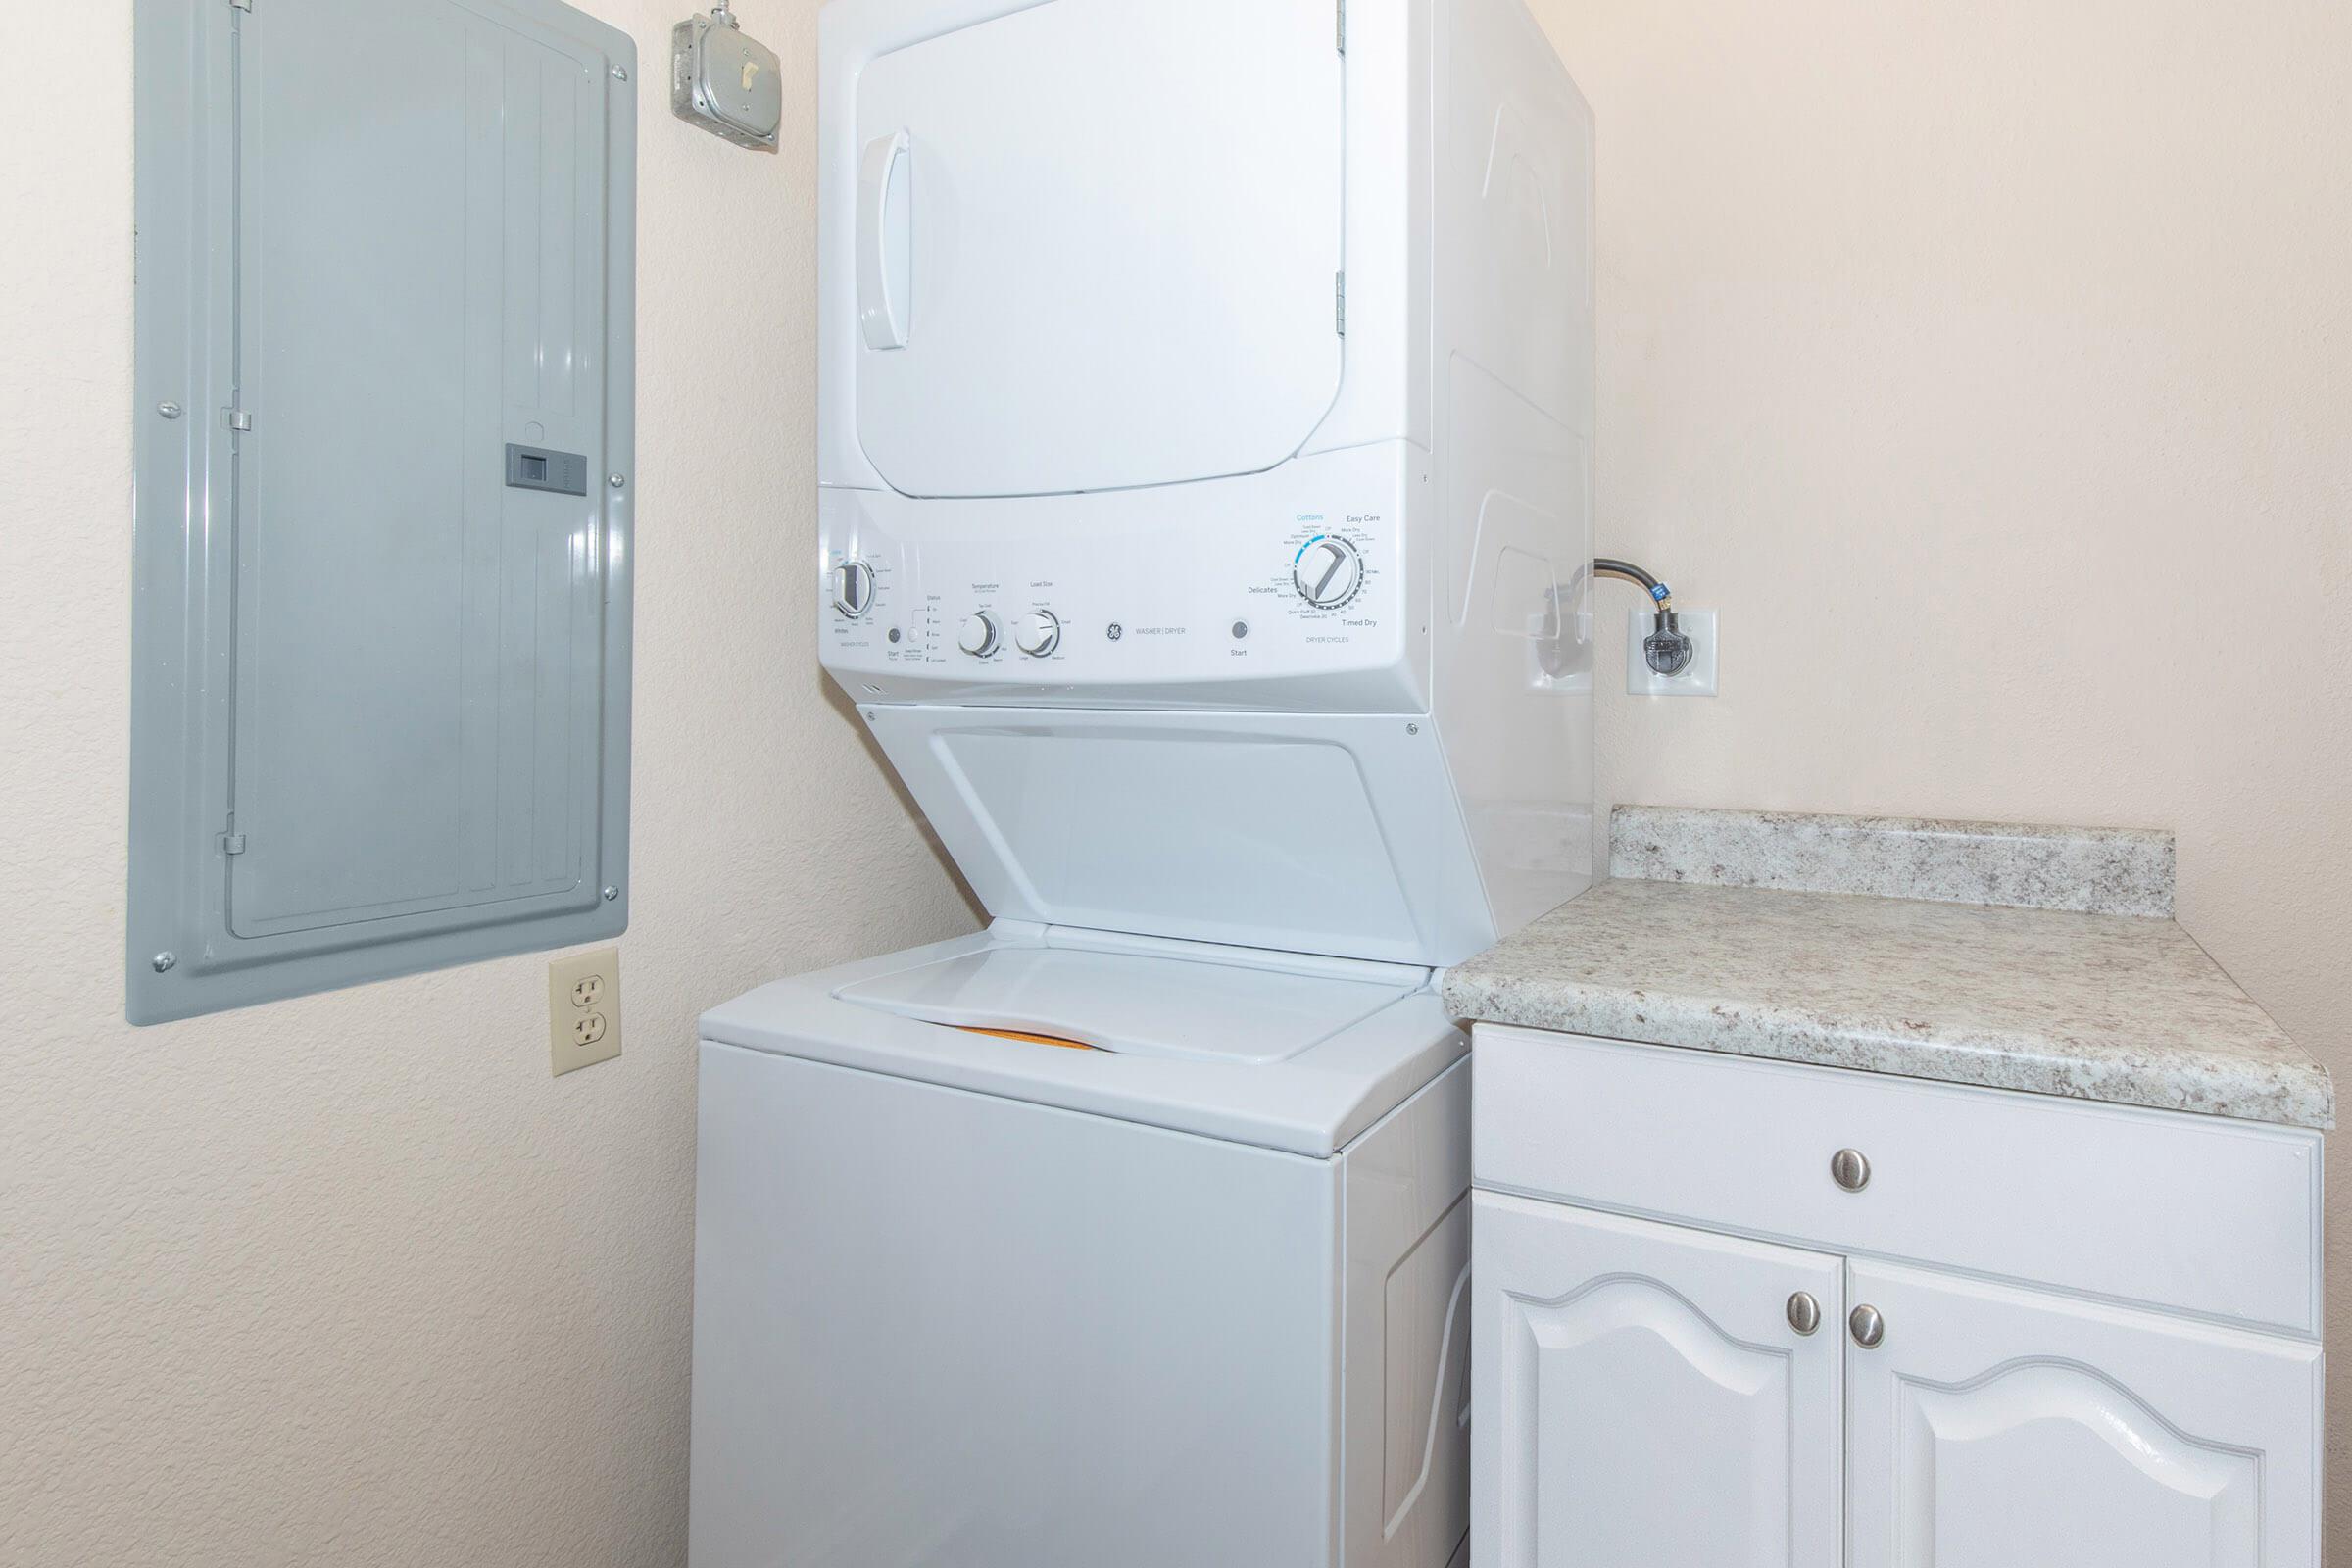 WASHERS AND DRYERS IN-HOME